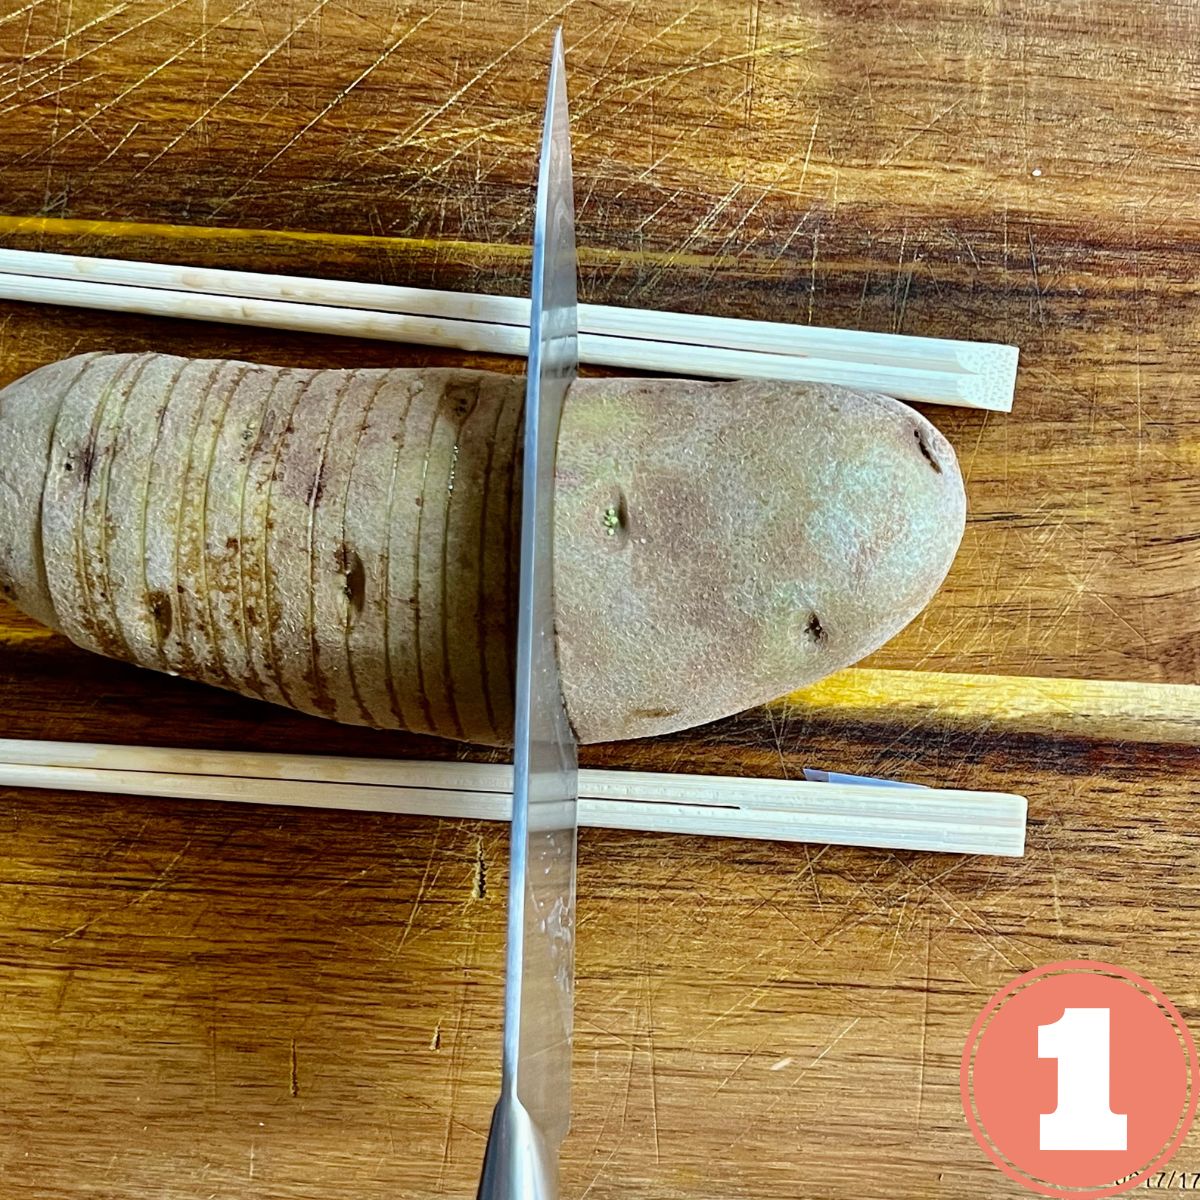 A russet potato on a wooden cutting board with chopsticks supporting the sides being sliced into a hasselback potato